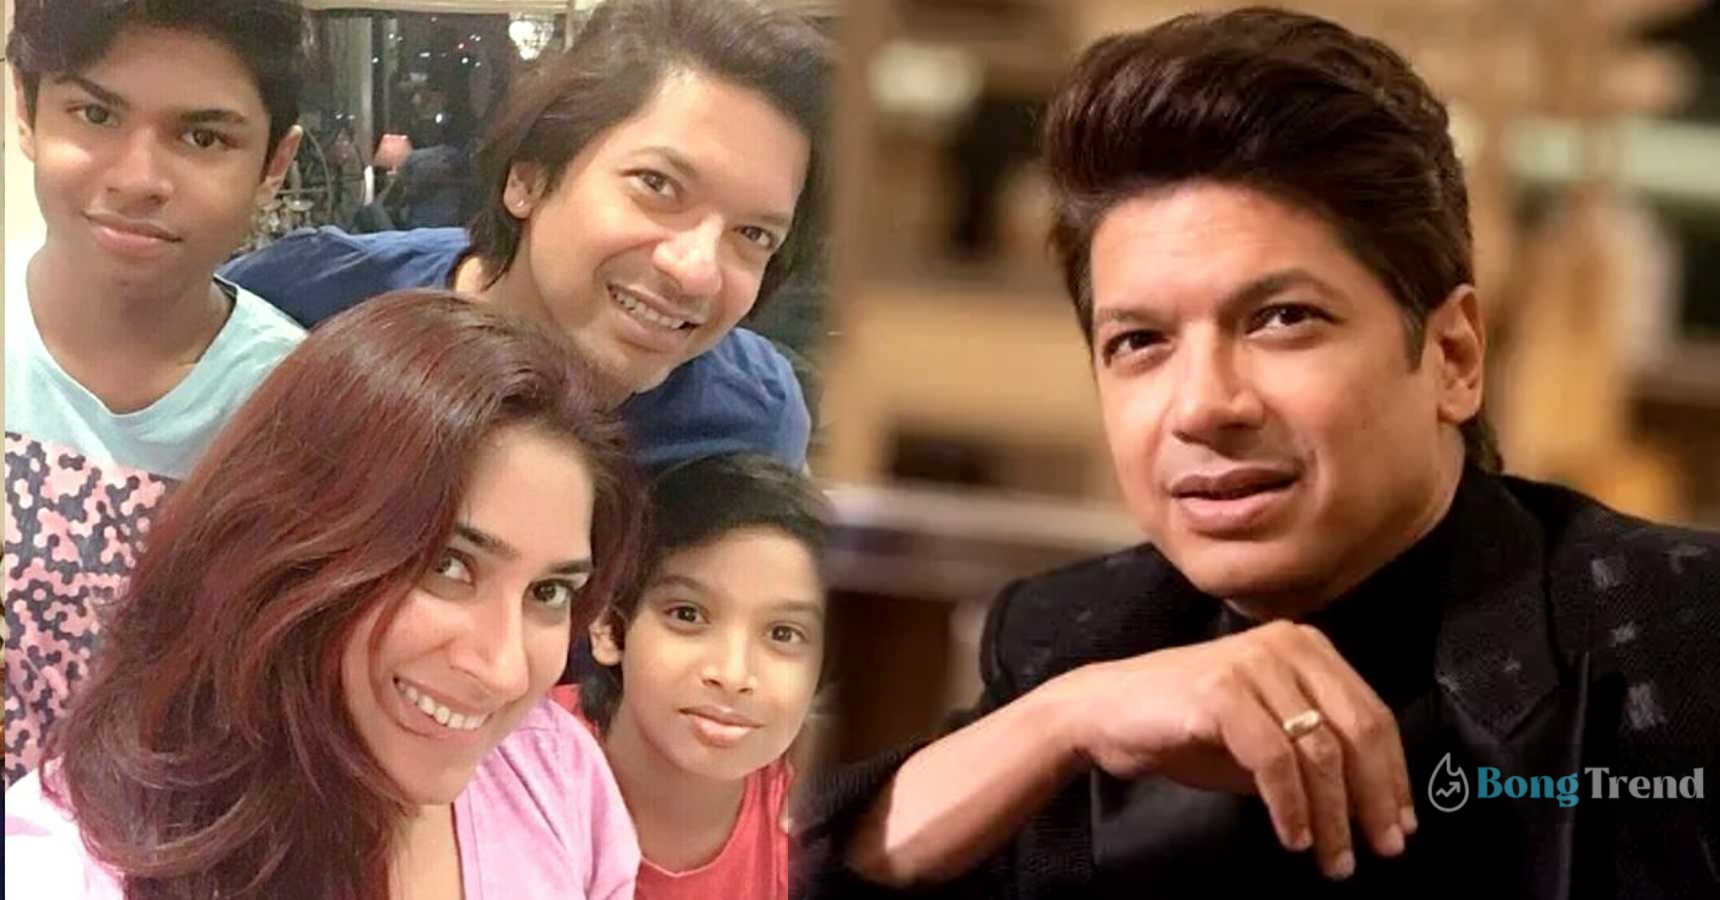 Singer Shaan Family worried about him after KK death